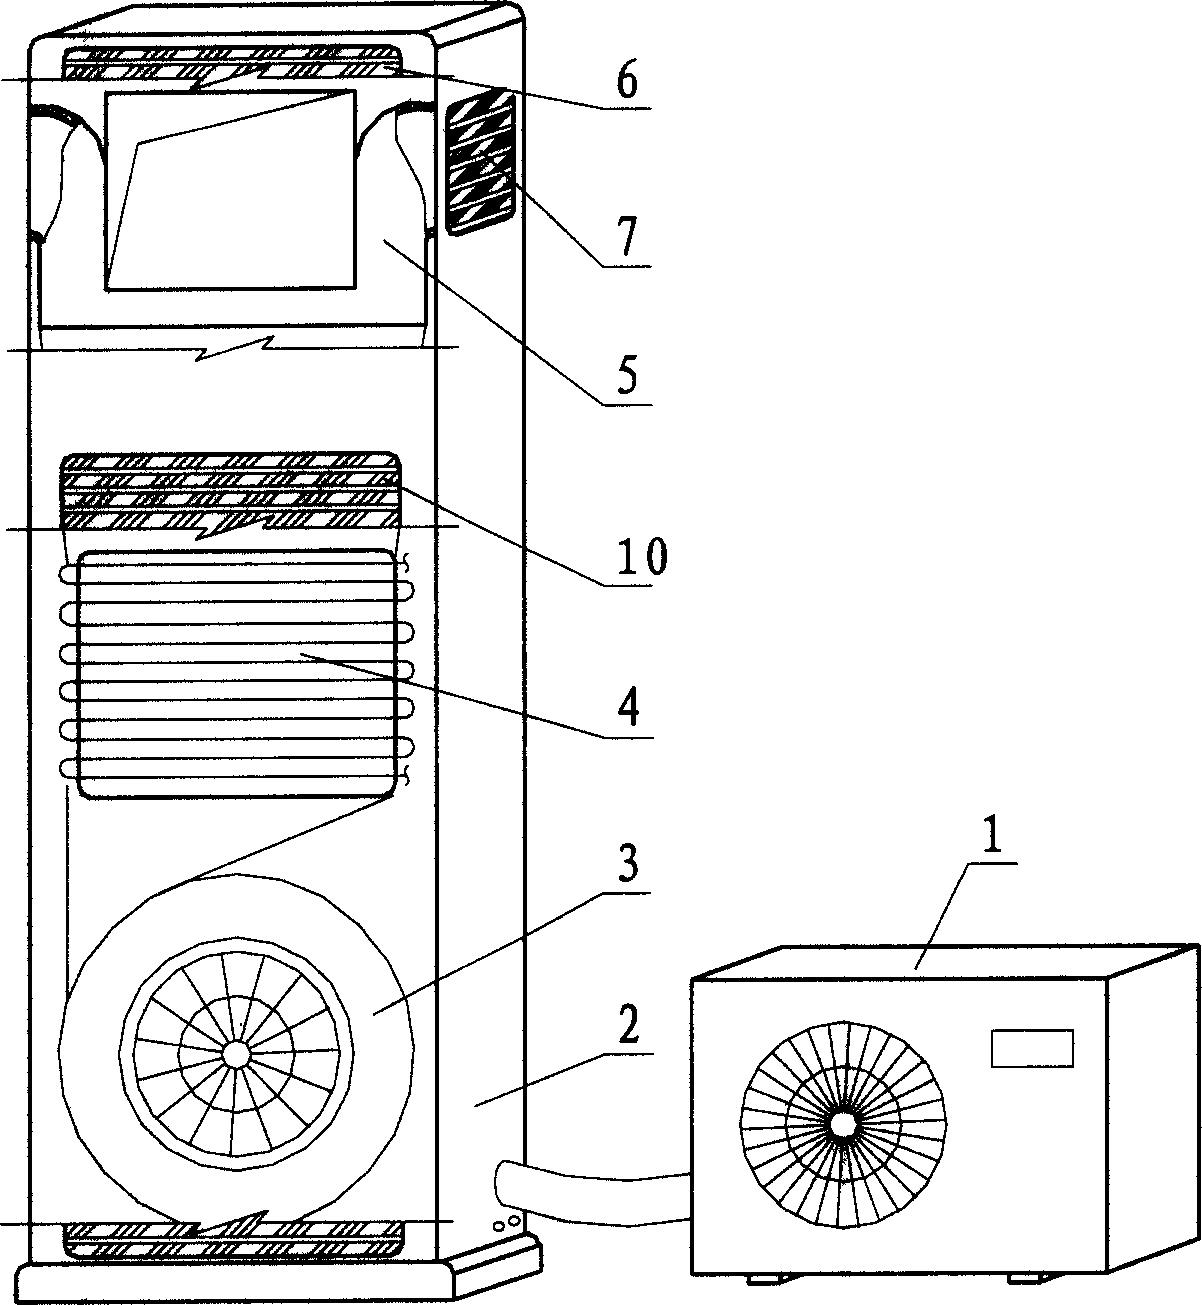 Cabinet air-conditioner with multi-directional air-blowing